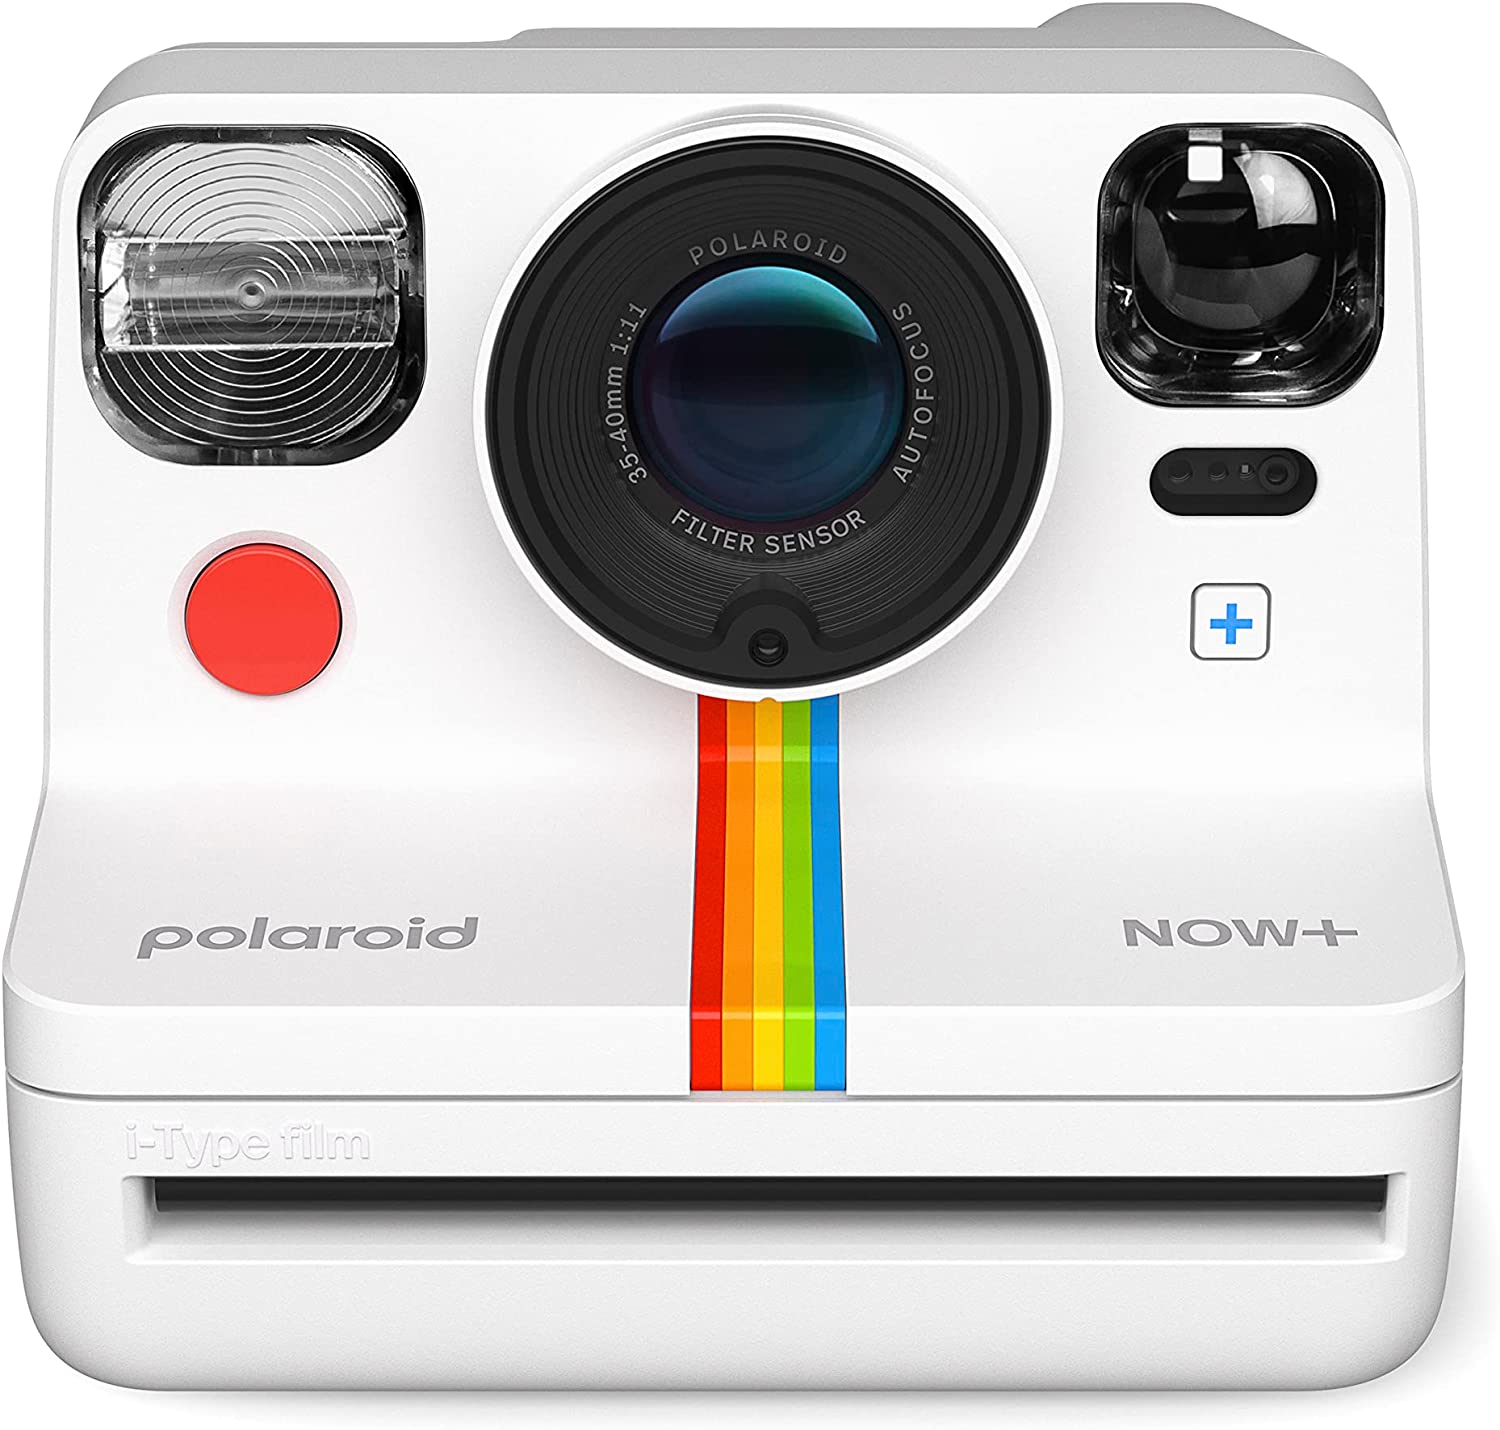 Product Image of Polaroid Now+ Gen 2 Instant Camera - White